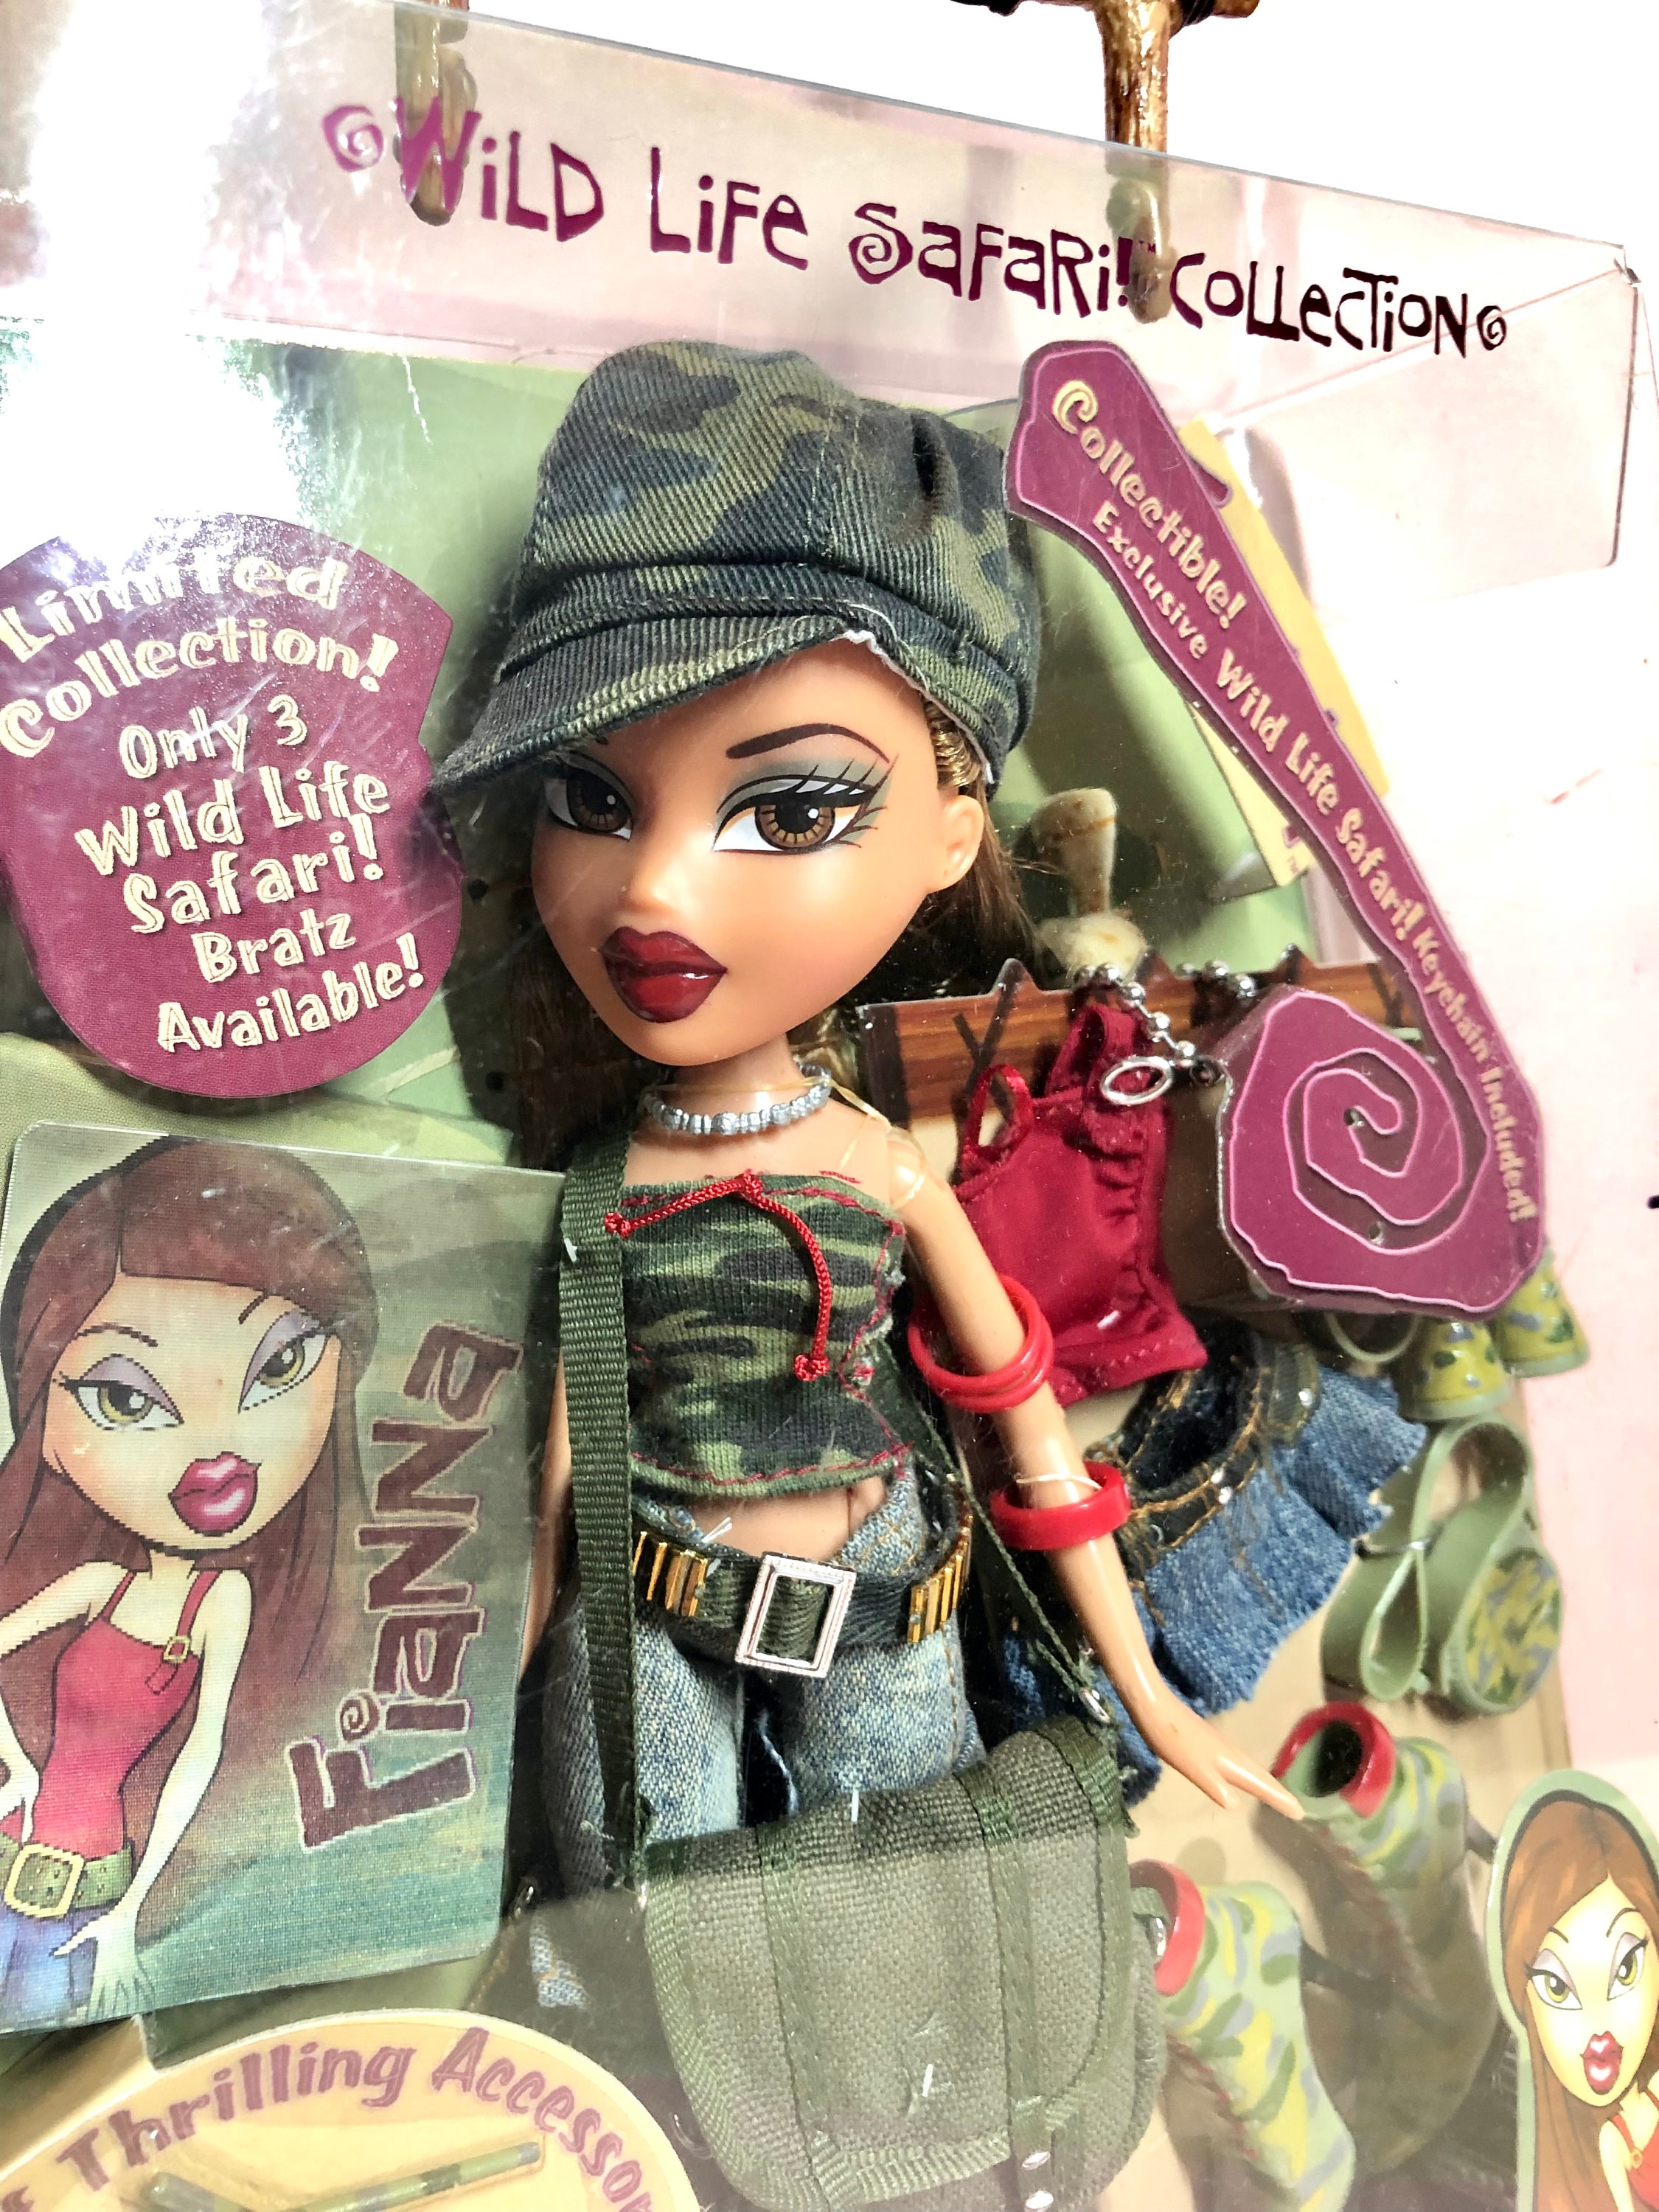 Bratz Wild Wild West Fianna! Original edition. Designed and autographed by  Bratz creator Carter Bryant, from his personal collection.